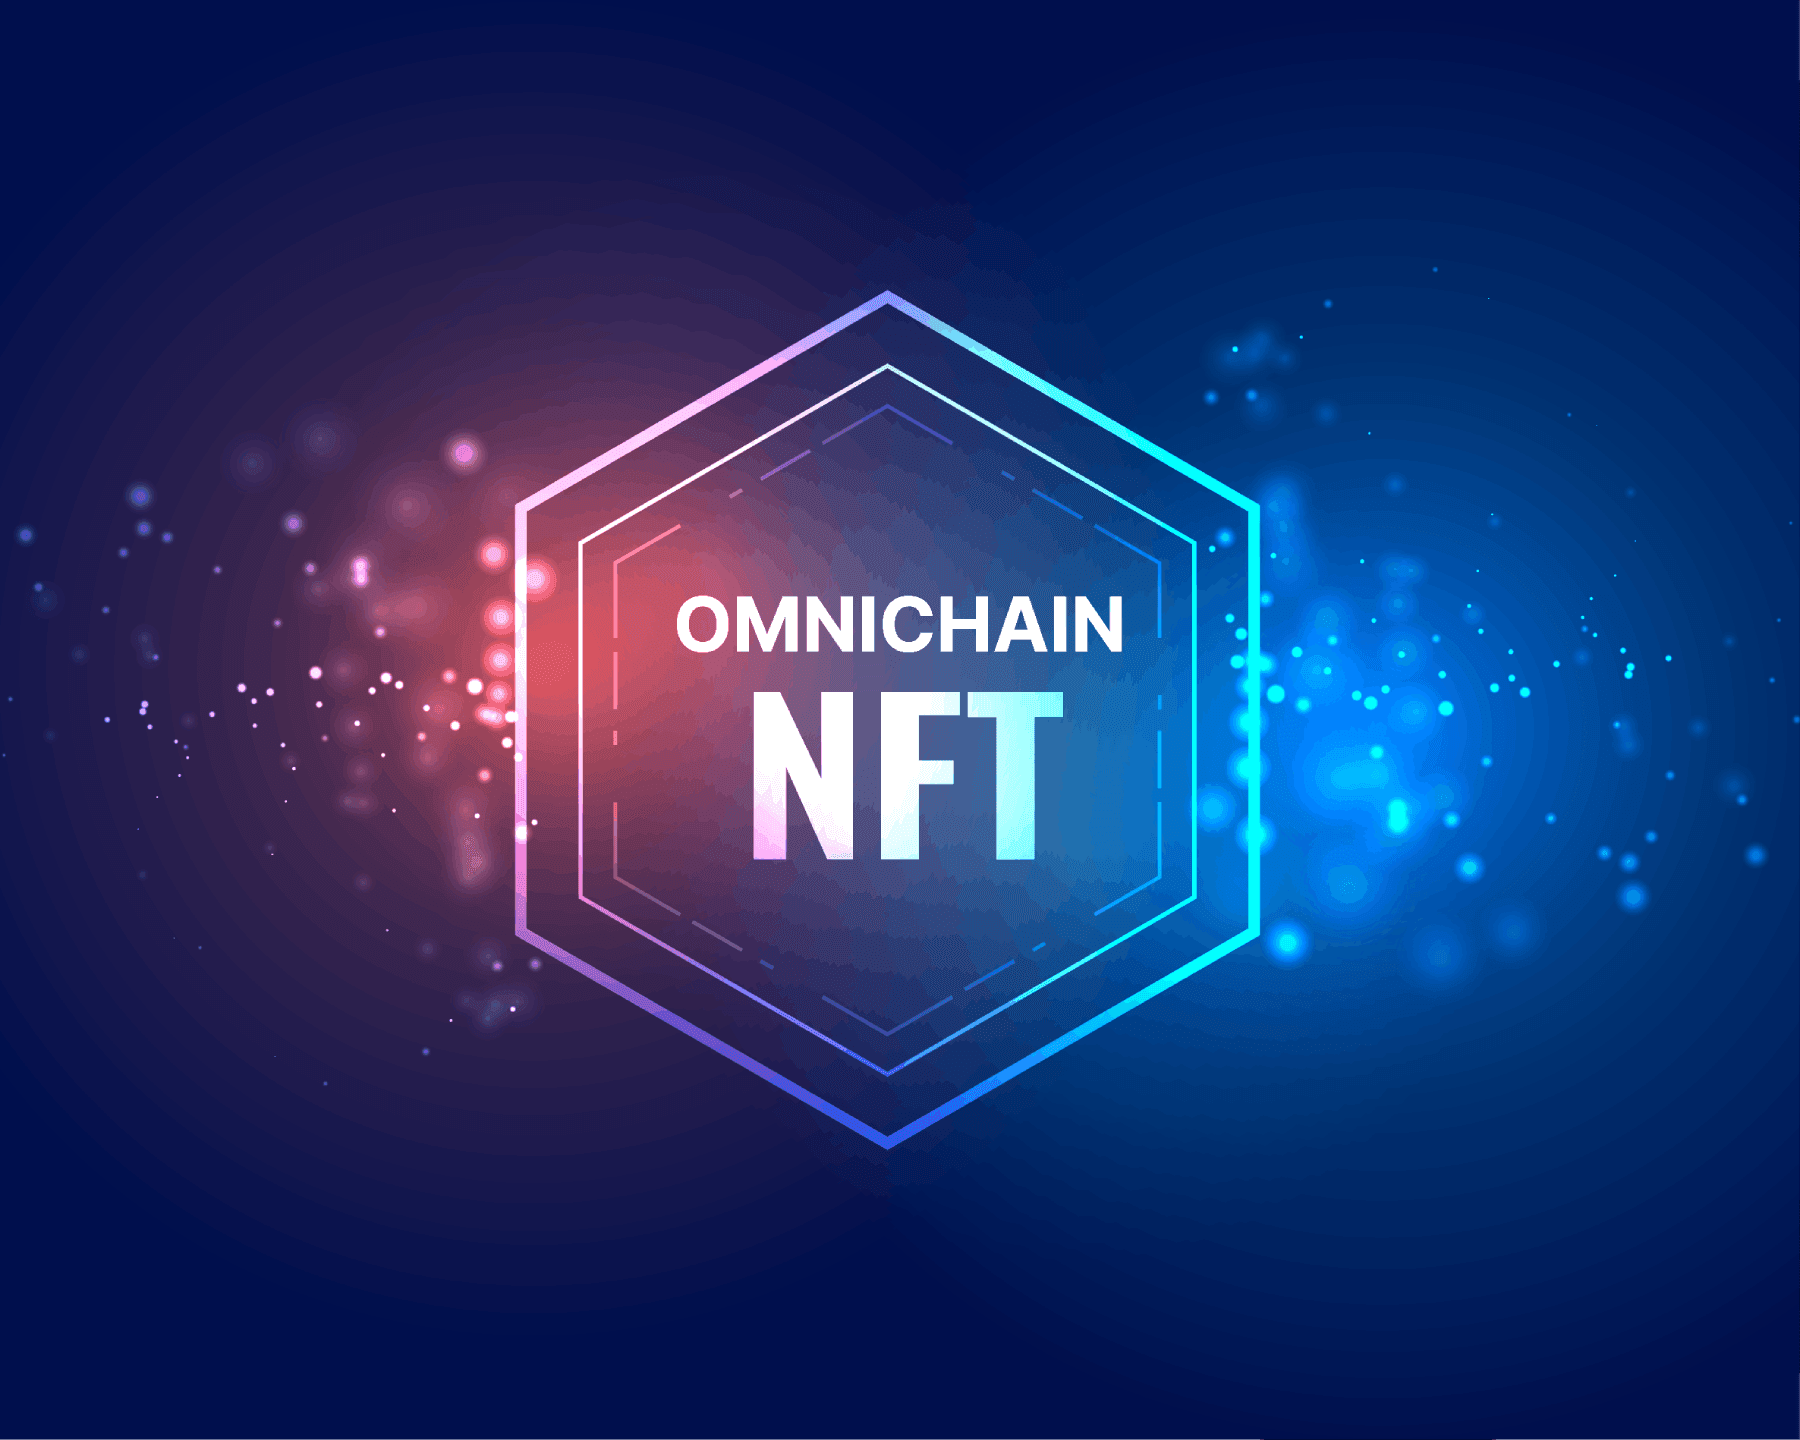 Omnichain NFTs by LayerZero allow omni chain nft communication and trading